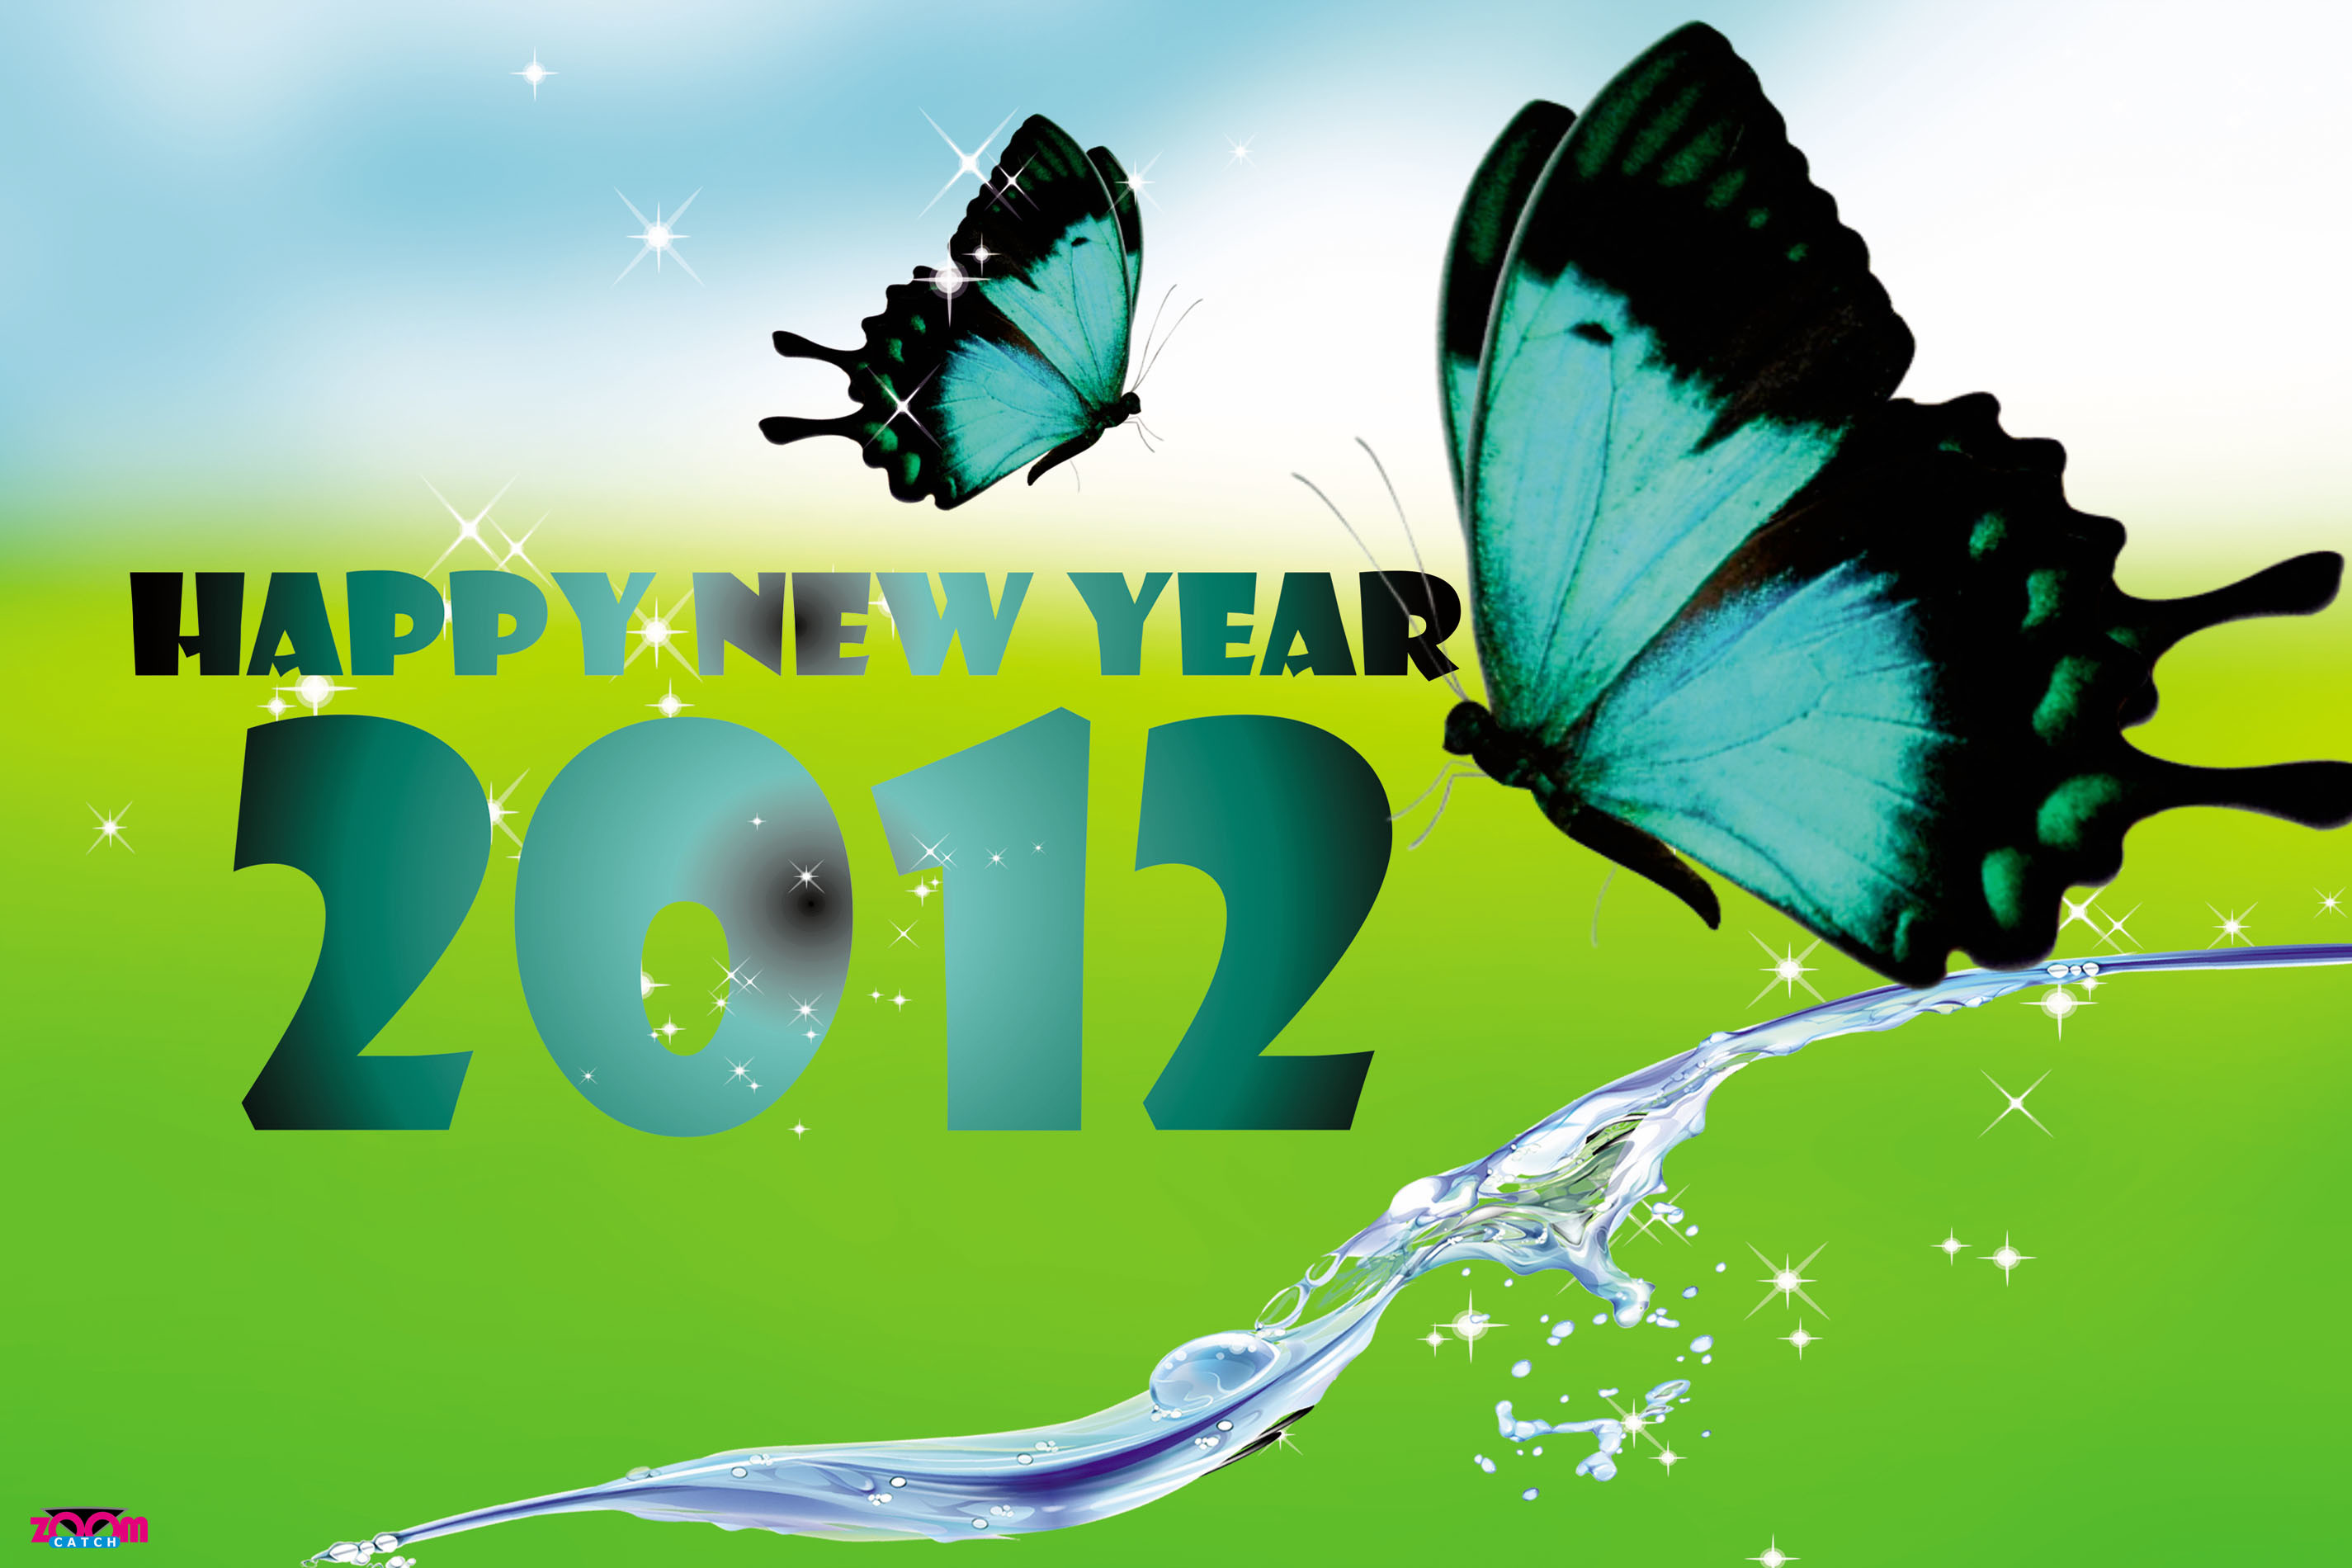 Happy New Year 2012 Wishes - HD Wallpaper 